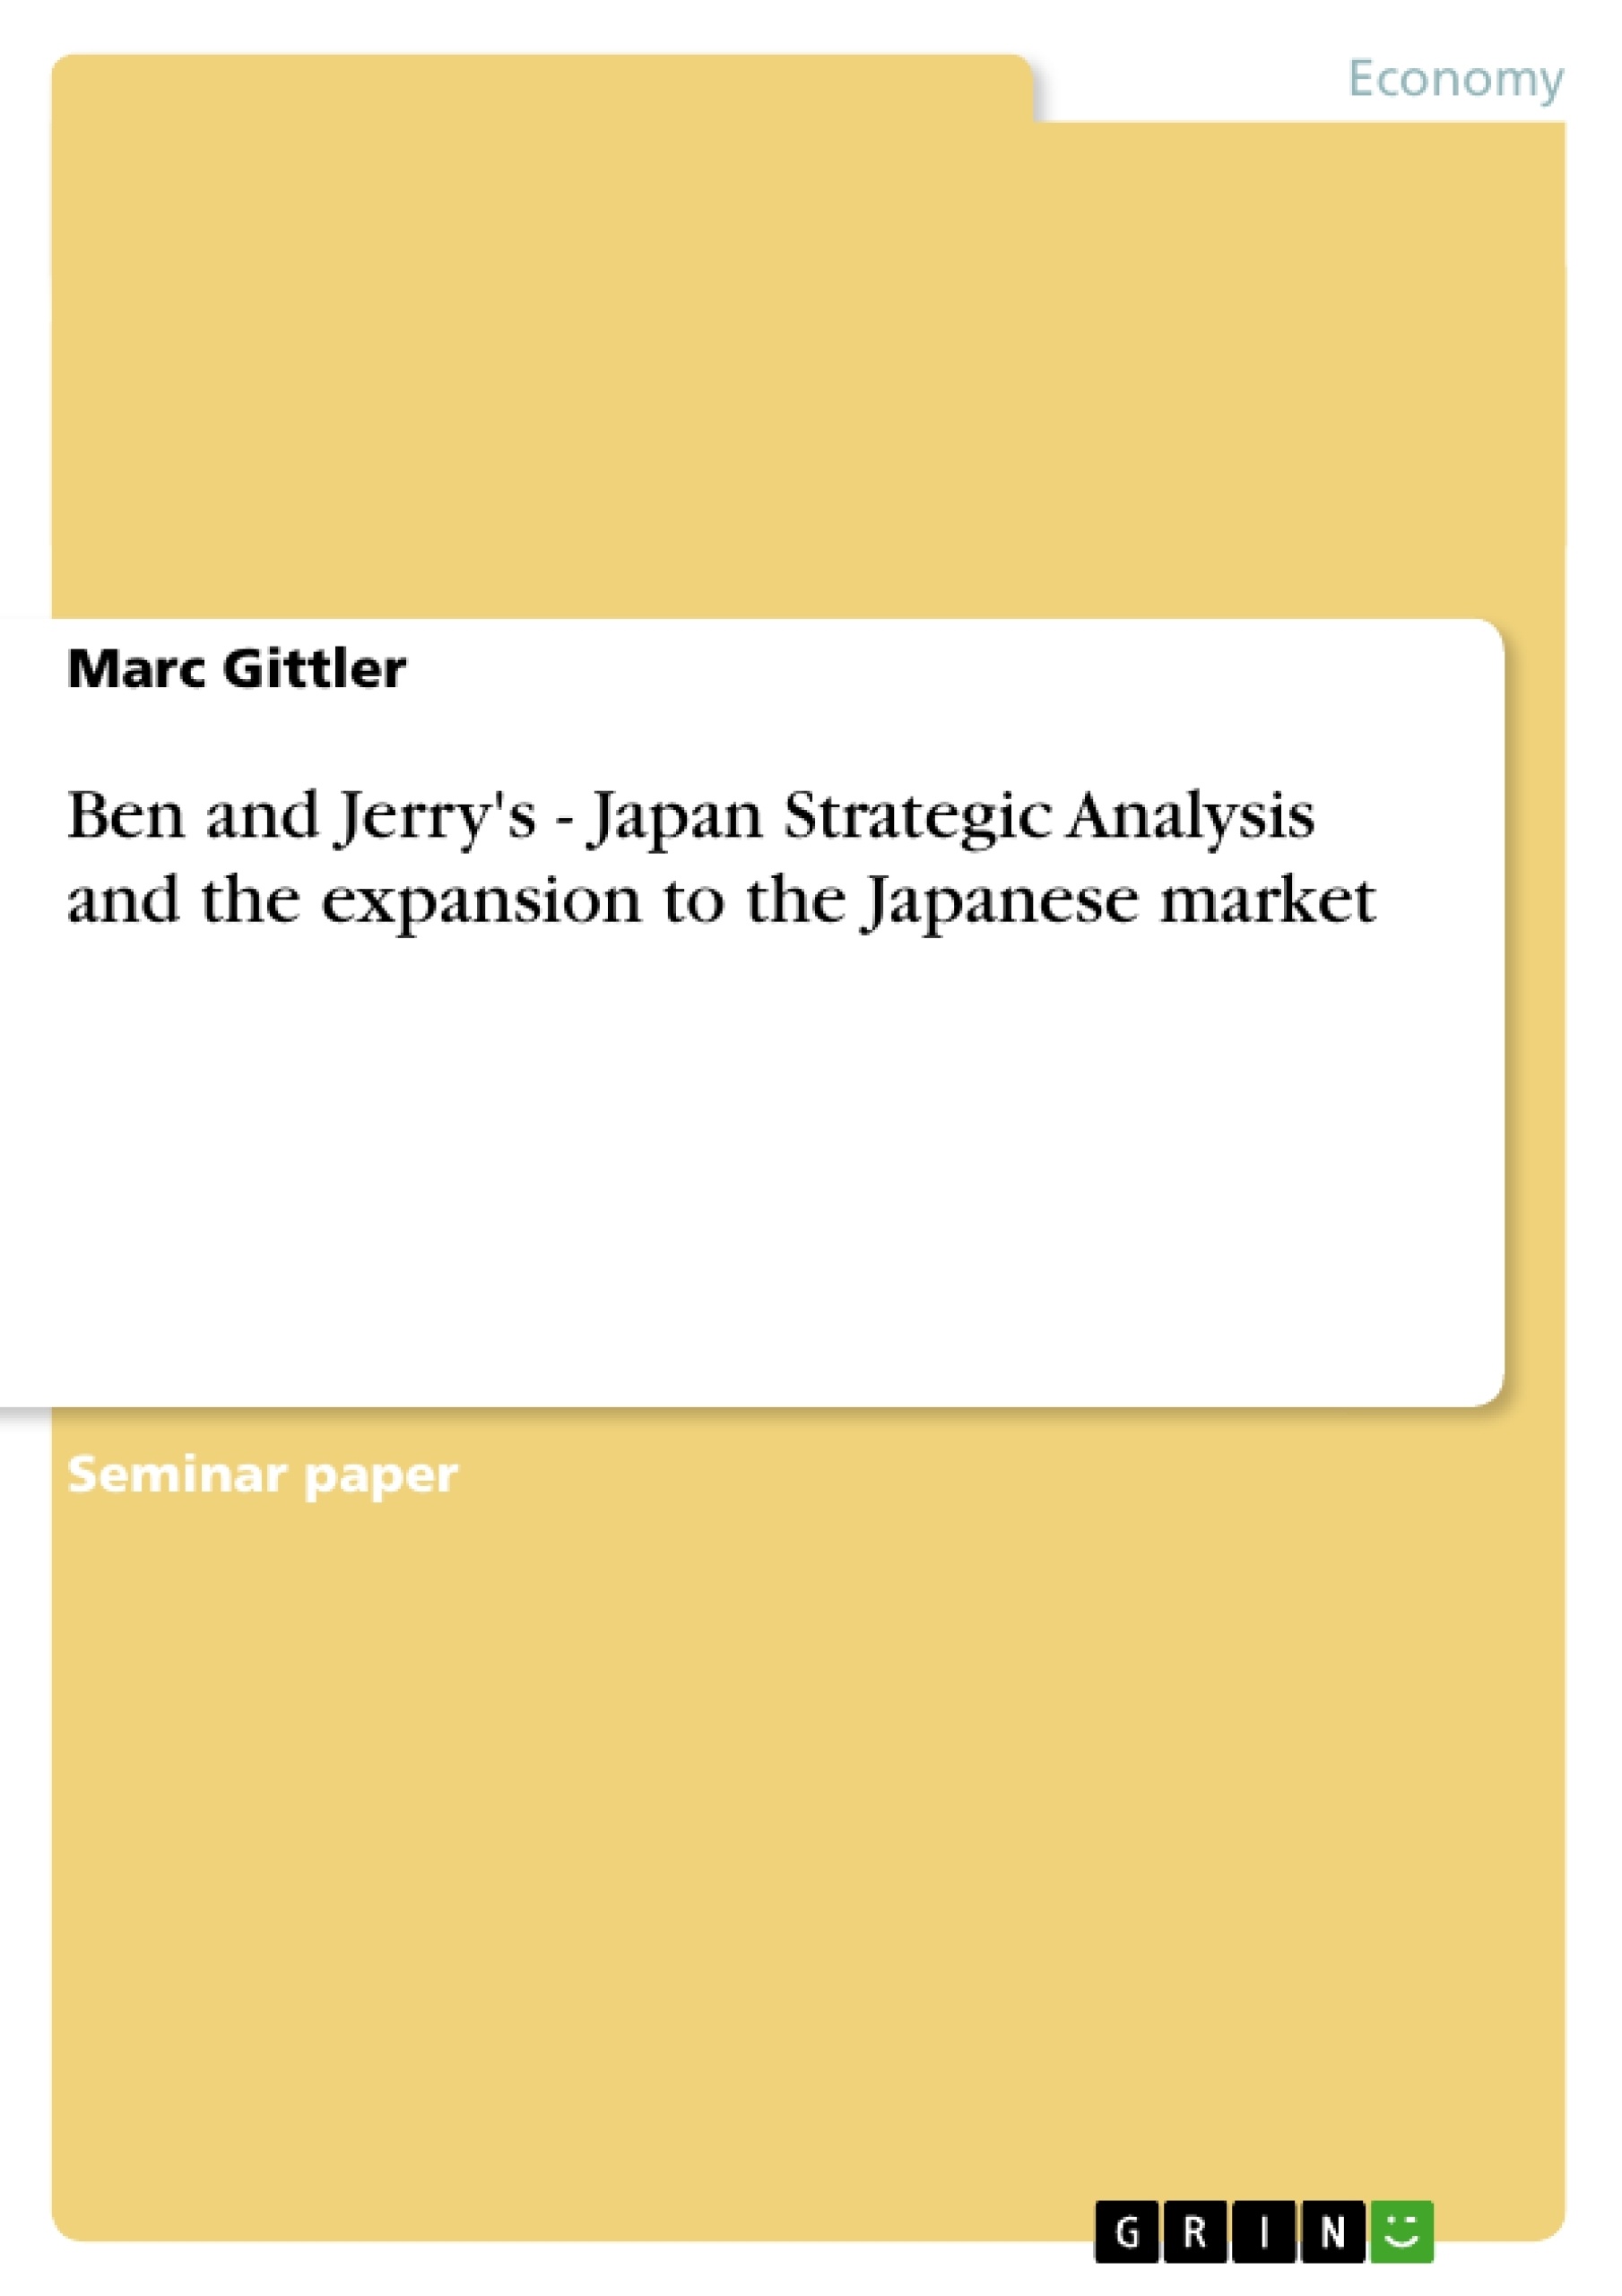 Título: Ben and Jerry's - Japan Strategic Analysis and the expansion to the Japanese market